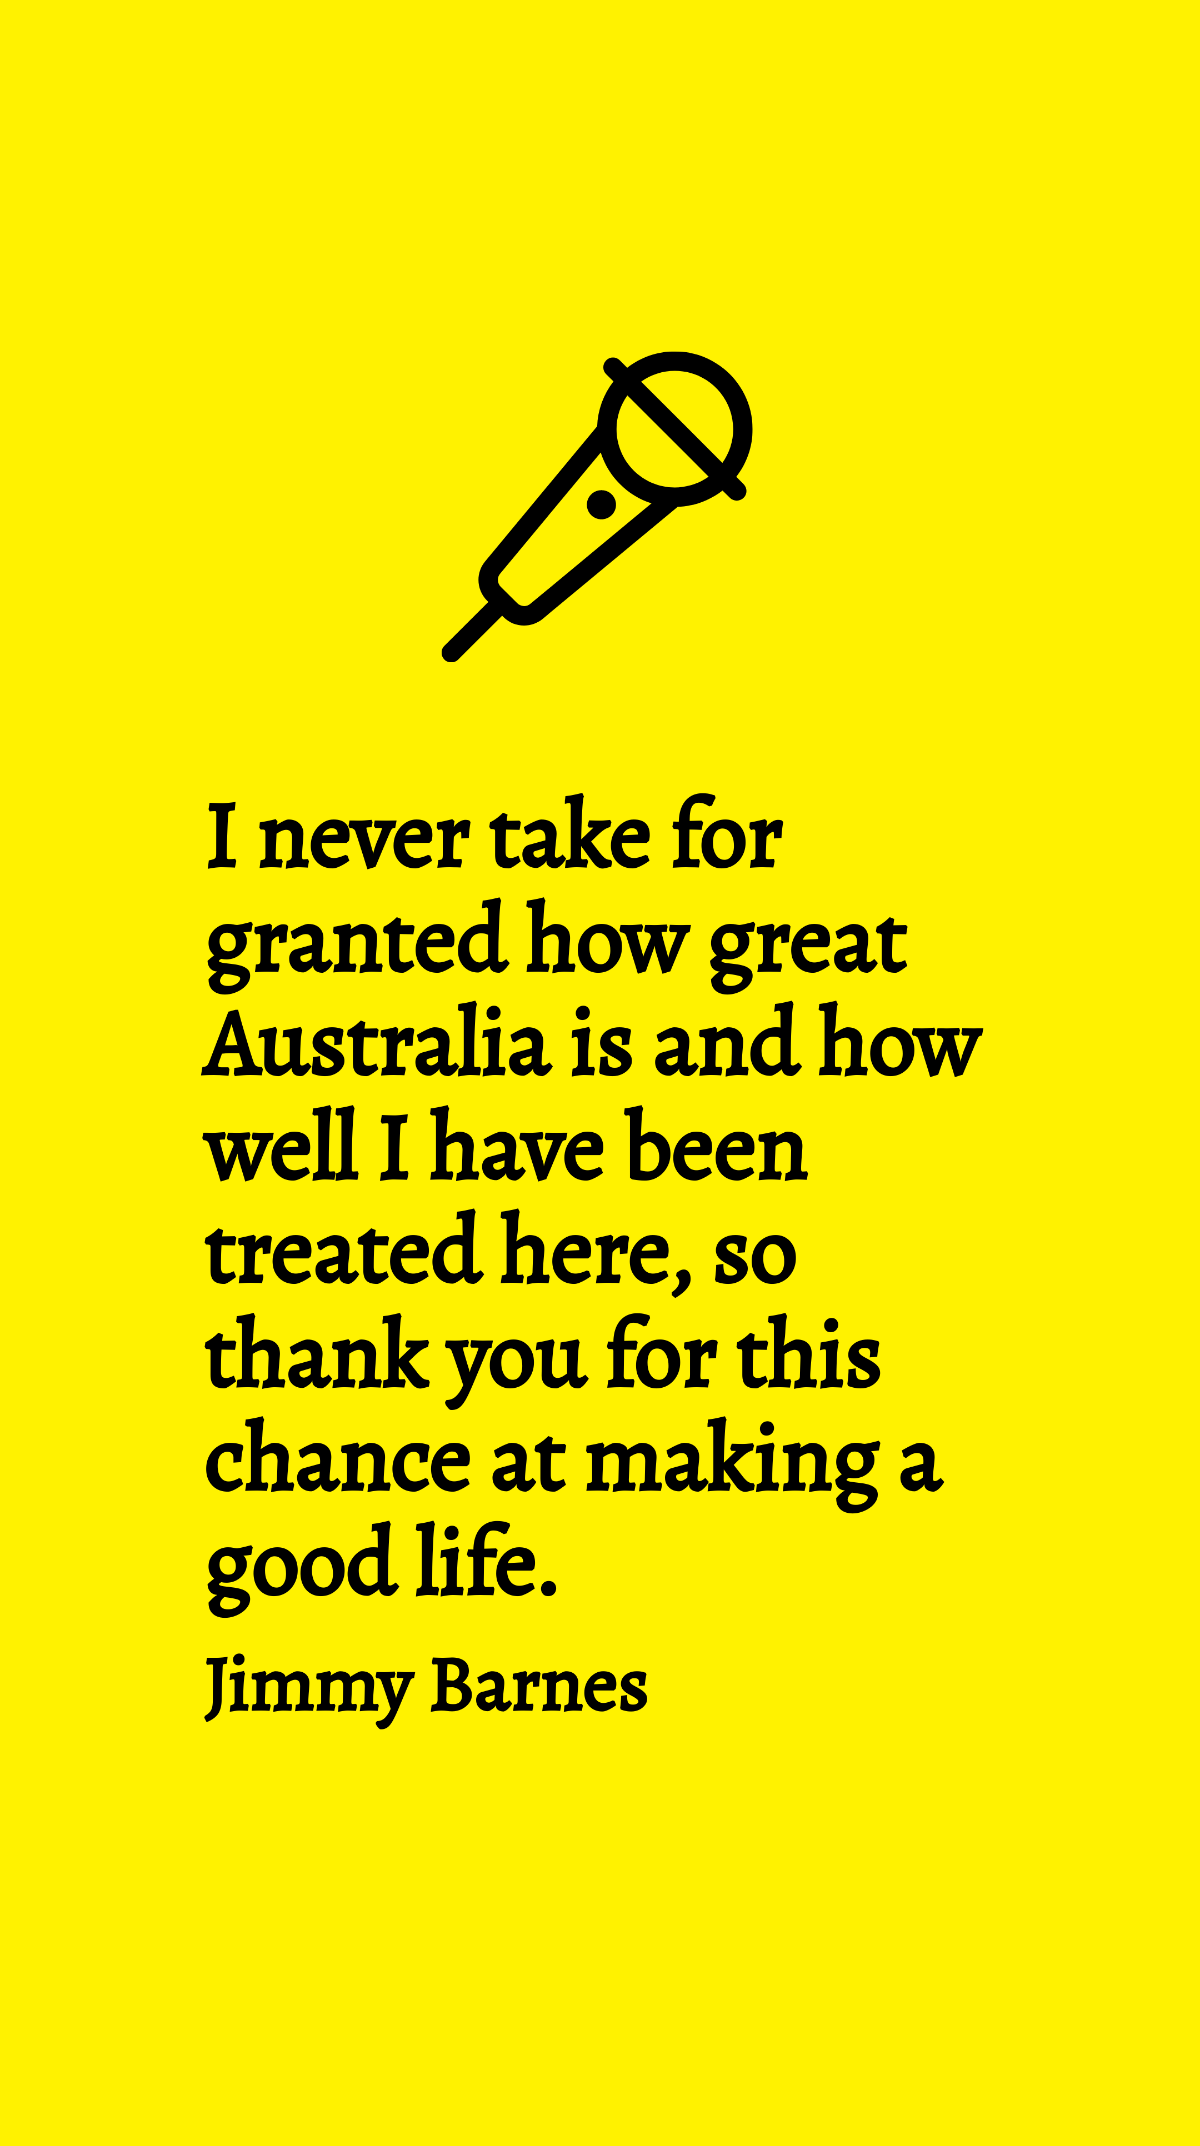 Jimmy Barnes - I never take for granted how great Australia is and how well I have been treated here, so thank you for this chance at making a good life. Template